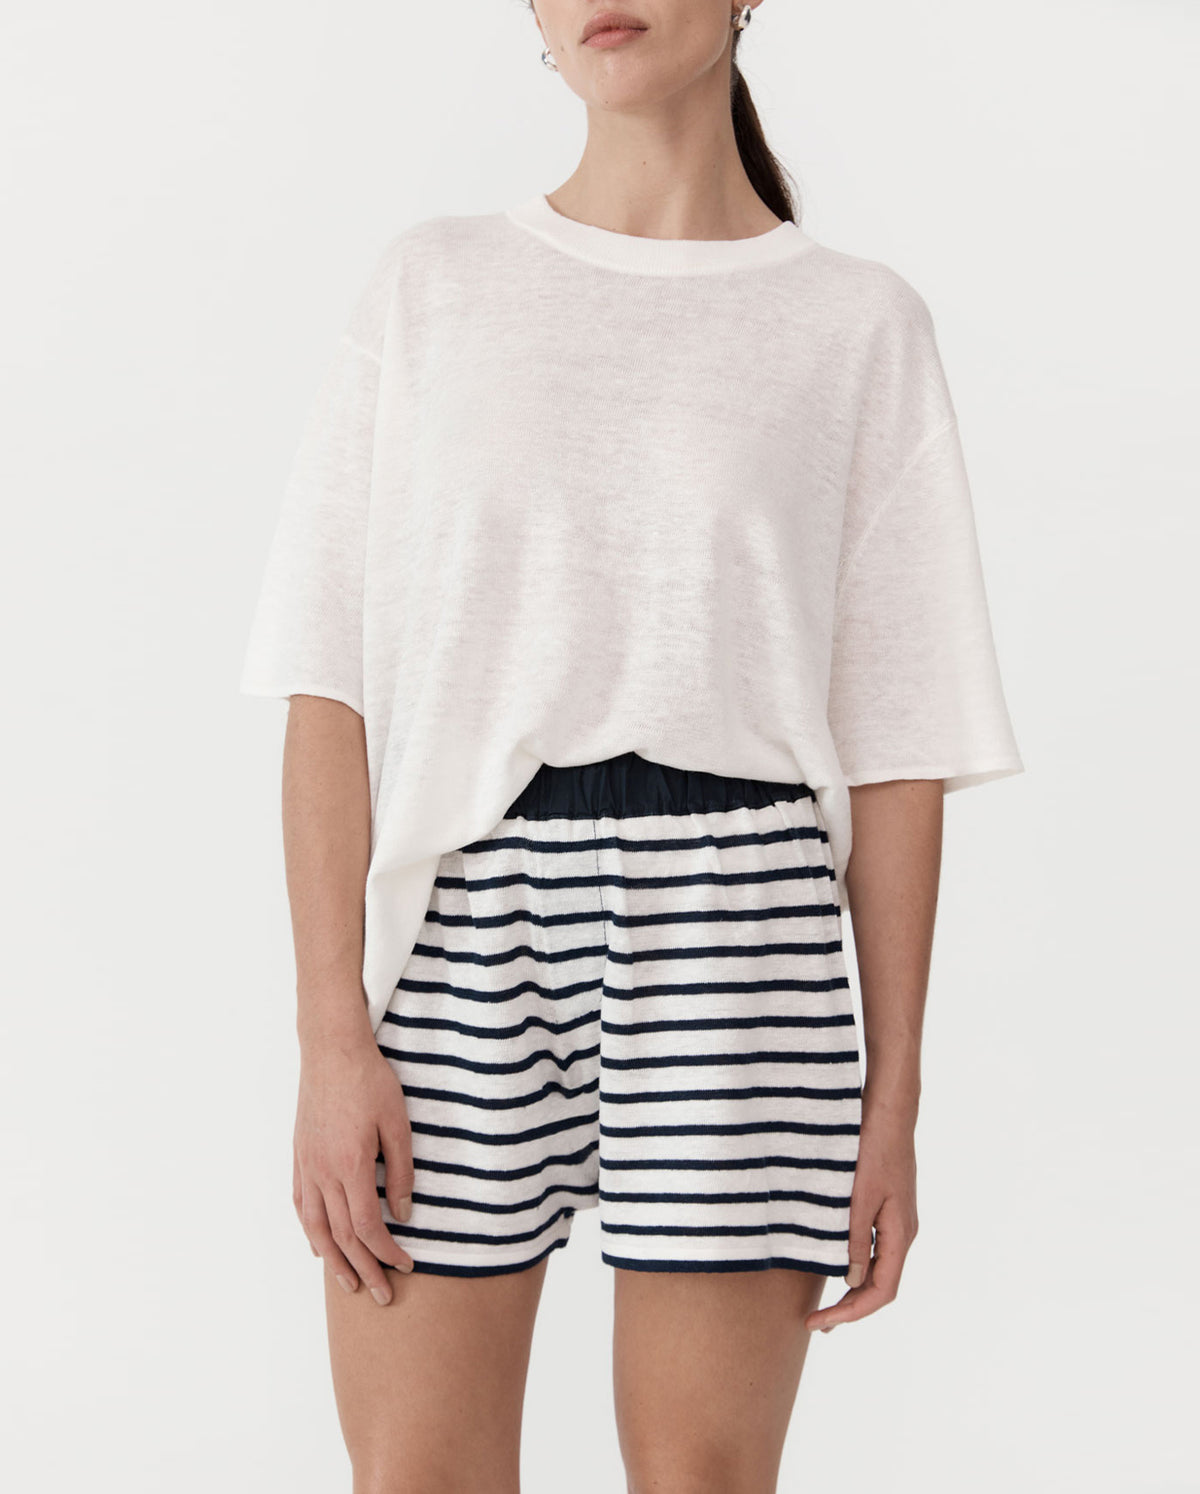 Copain Knit Tee - Off White